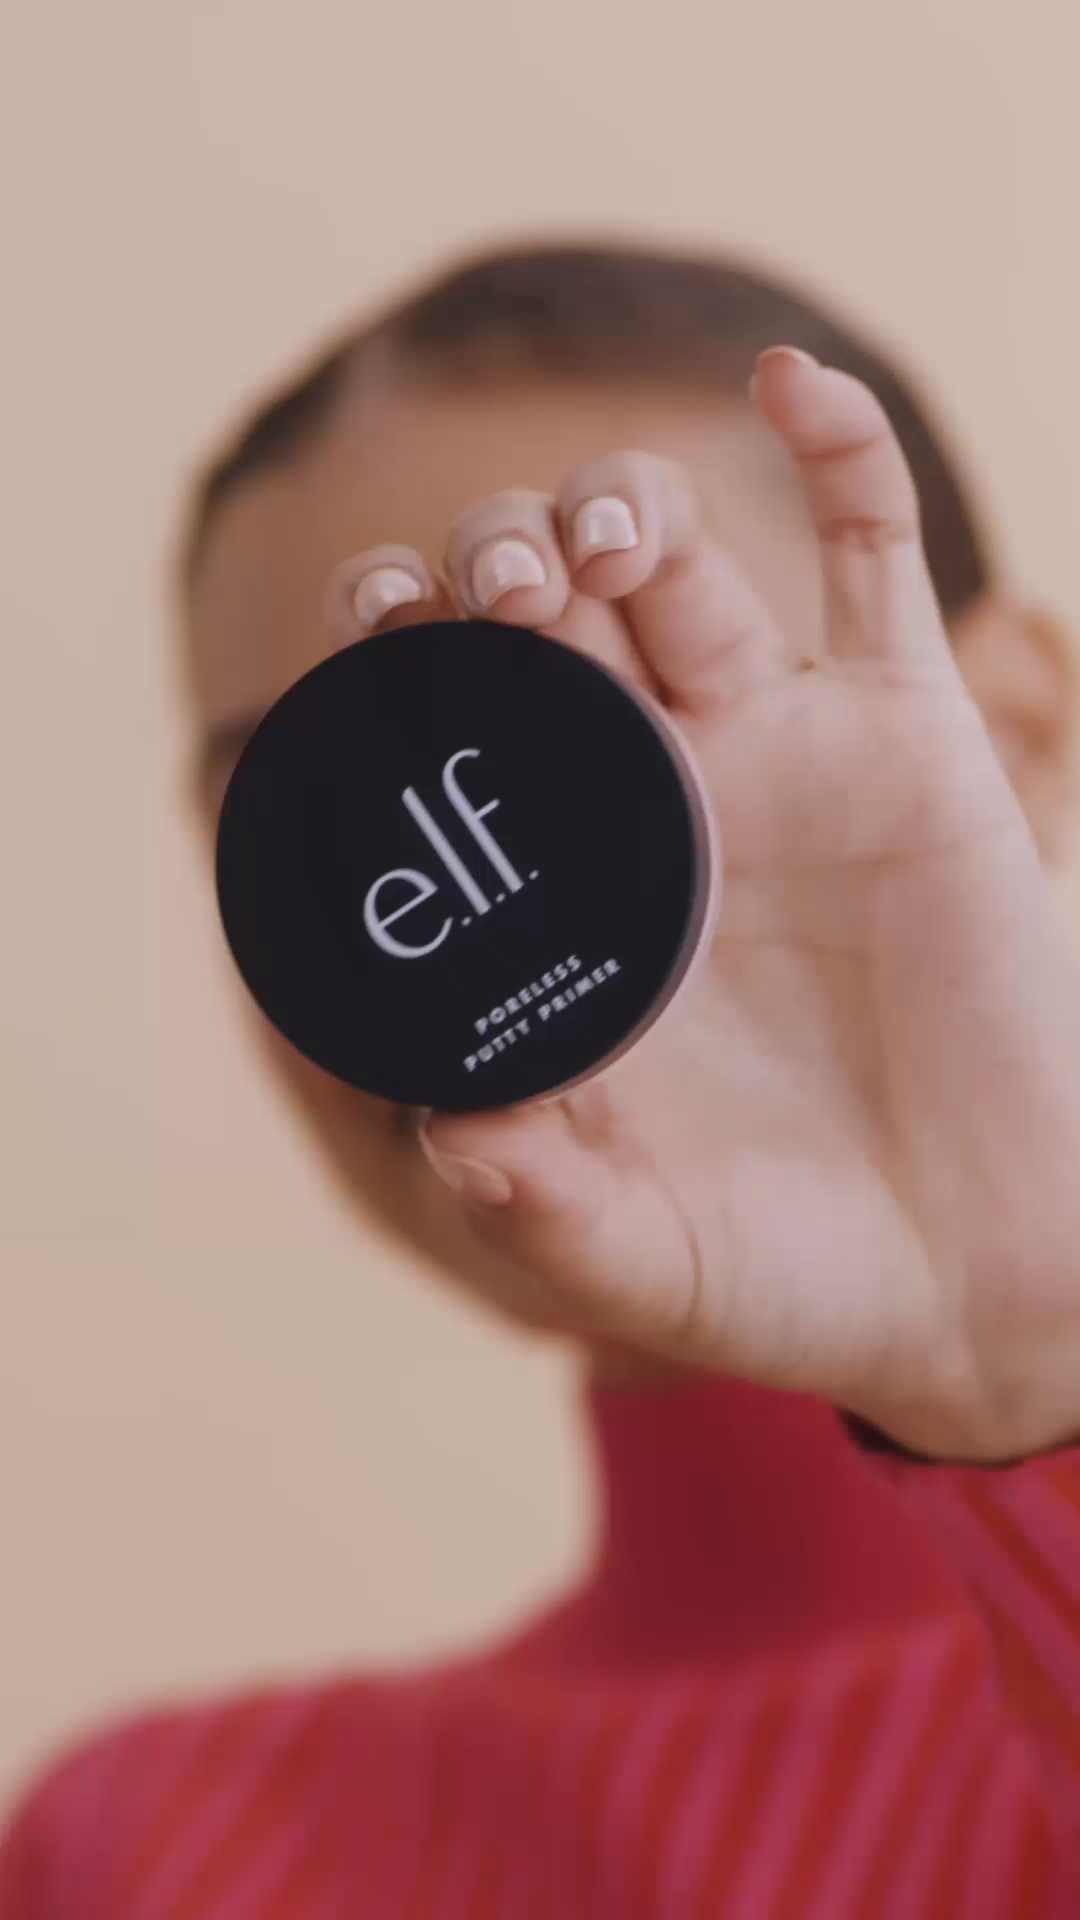 Meet The e.l.f Icons Today! - Meet The e.l.f Icons Today! -   20 beauty Videos photoshoot ideas